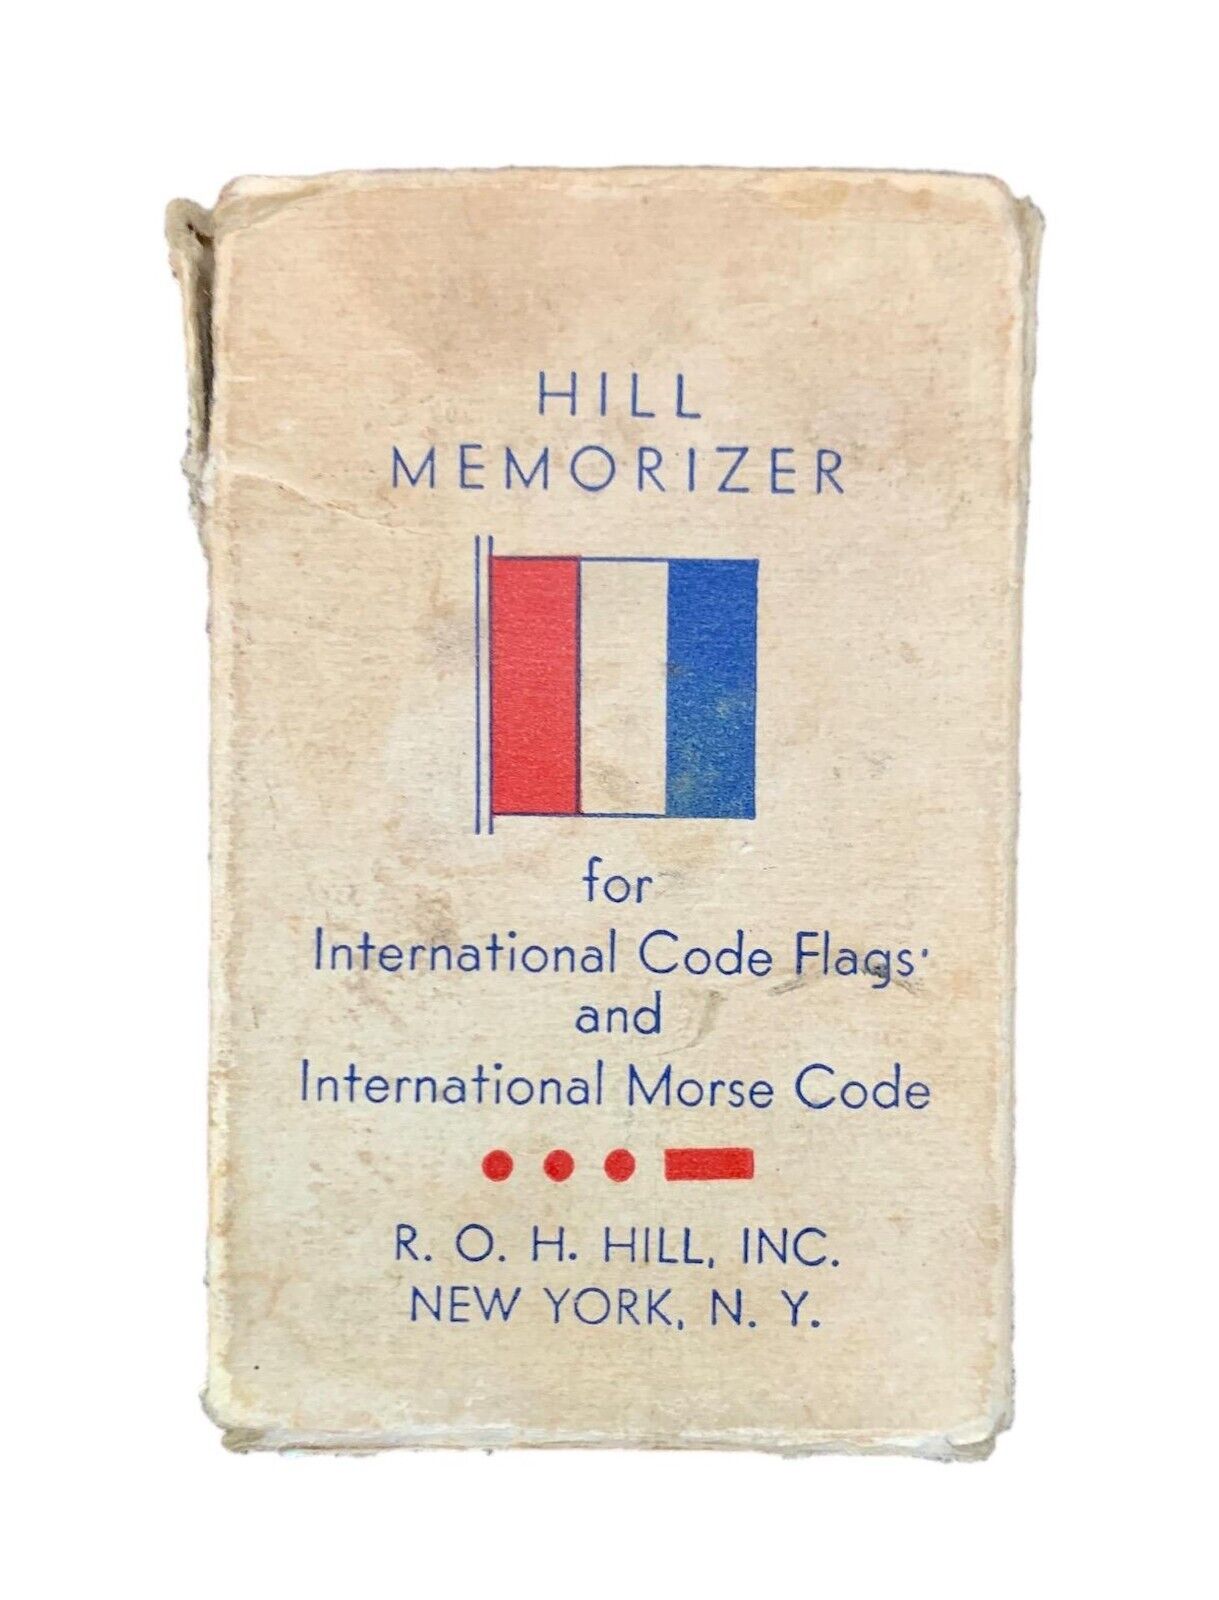 VTG International Code Flags & Morse Code Playing Cards by Hill Memorizer